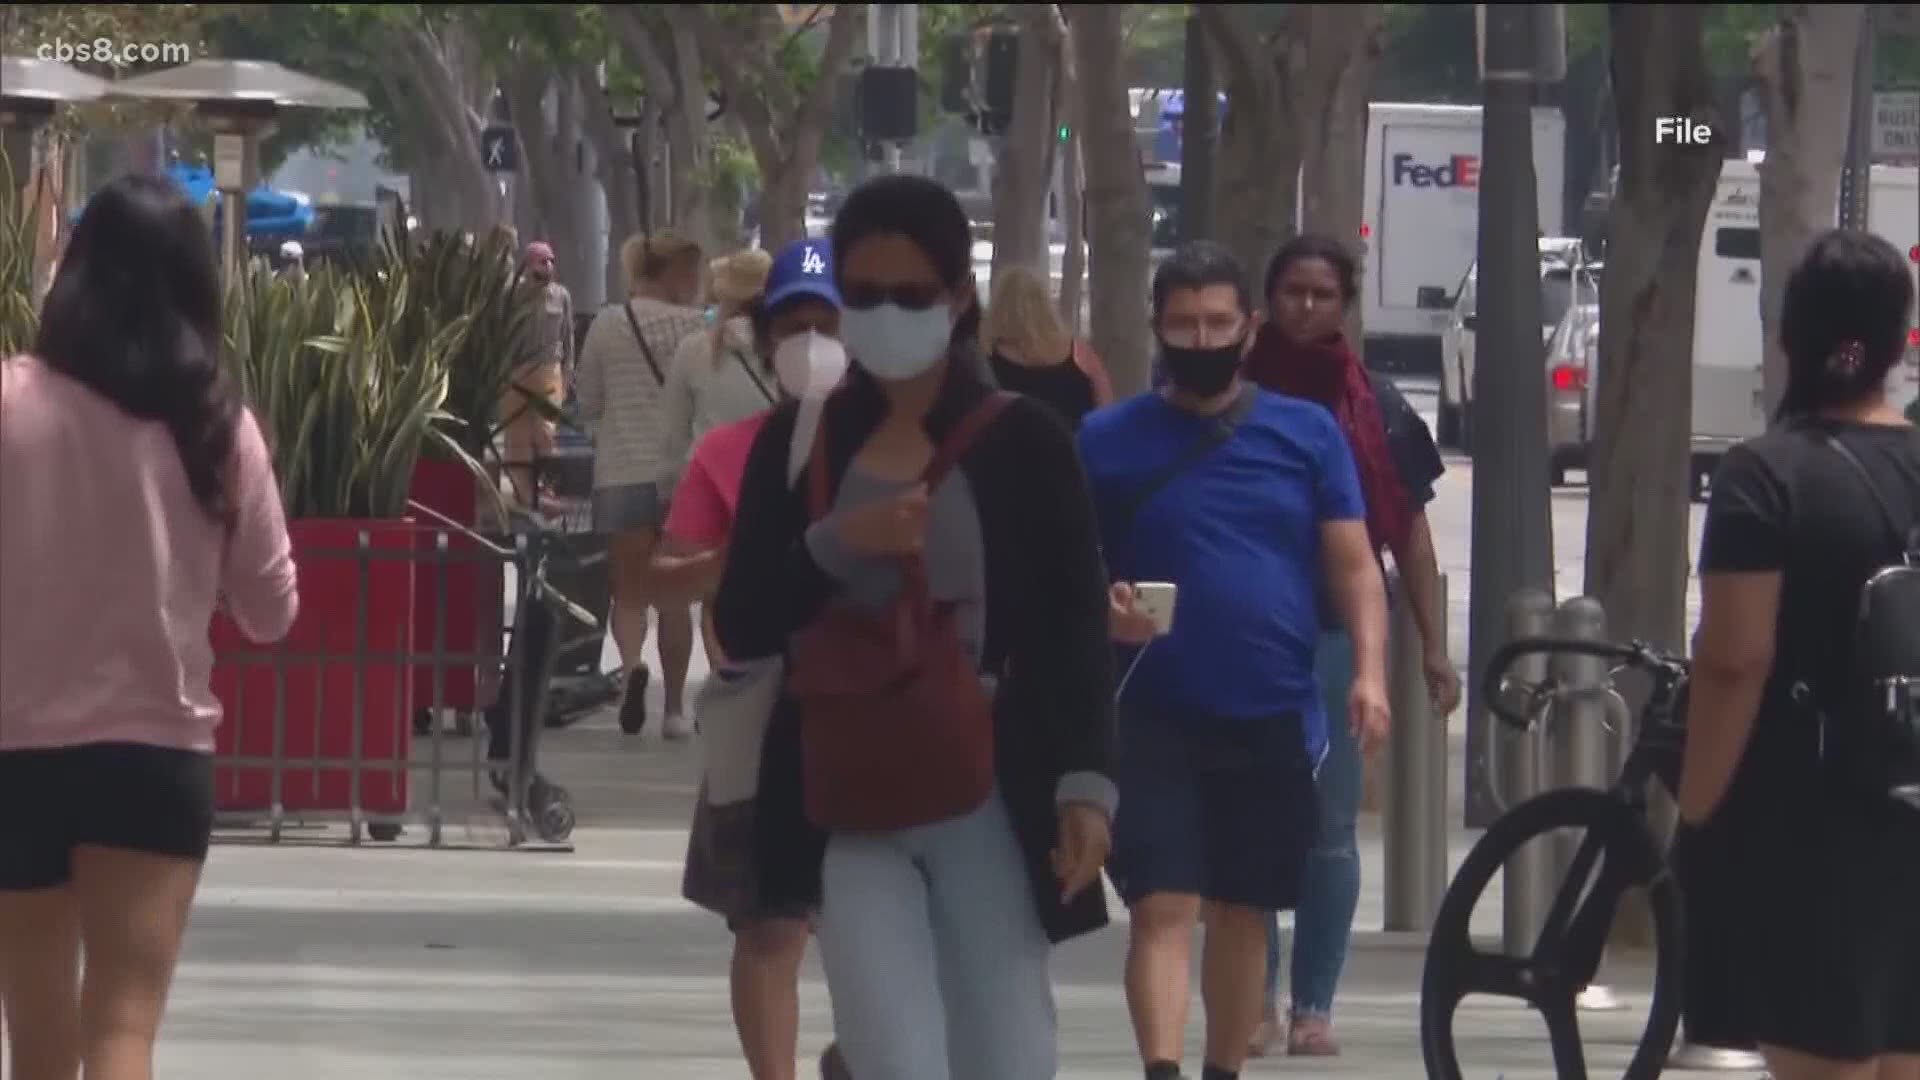 Starting Tuesday, there will be no capacity limits or physical distancing requirements for businesses. Fully vaccinated people can stop wearing masks in most places.